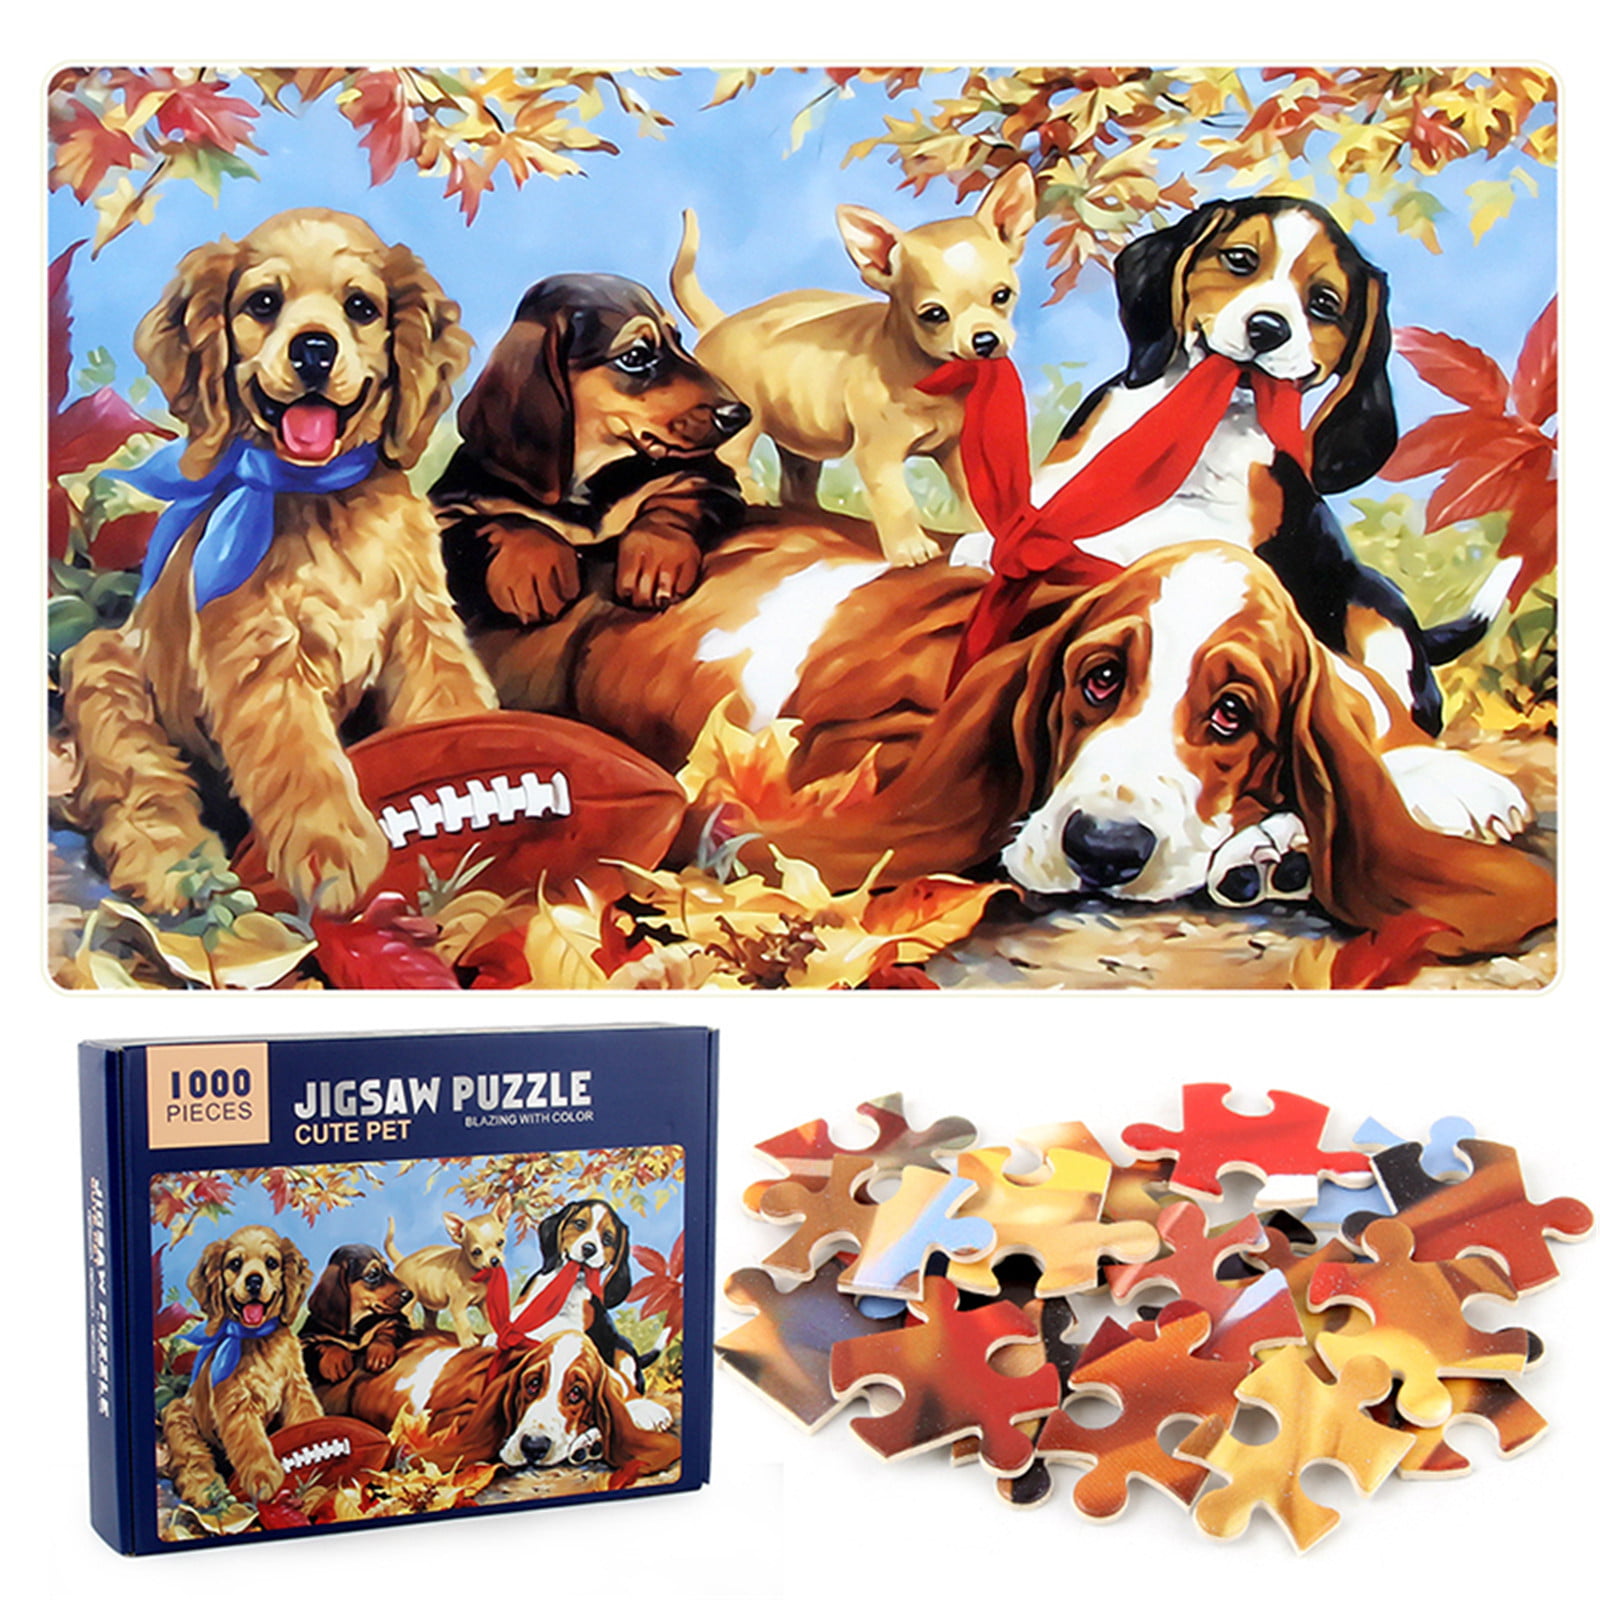 New Jigsaw Puzzles Pieces Piece 1000 Puzzle Dog Education Kids Adults Toy Adult 